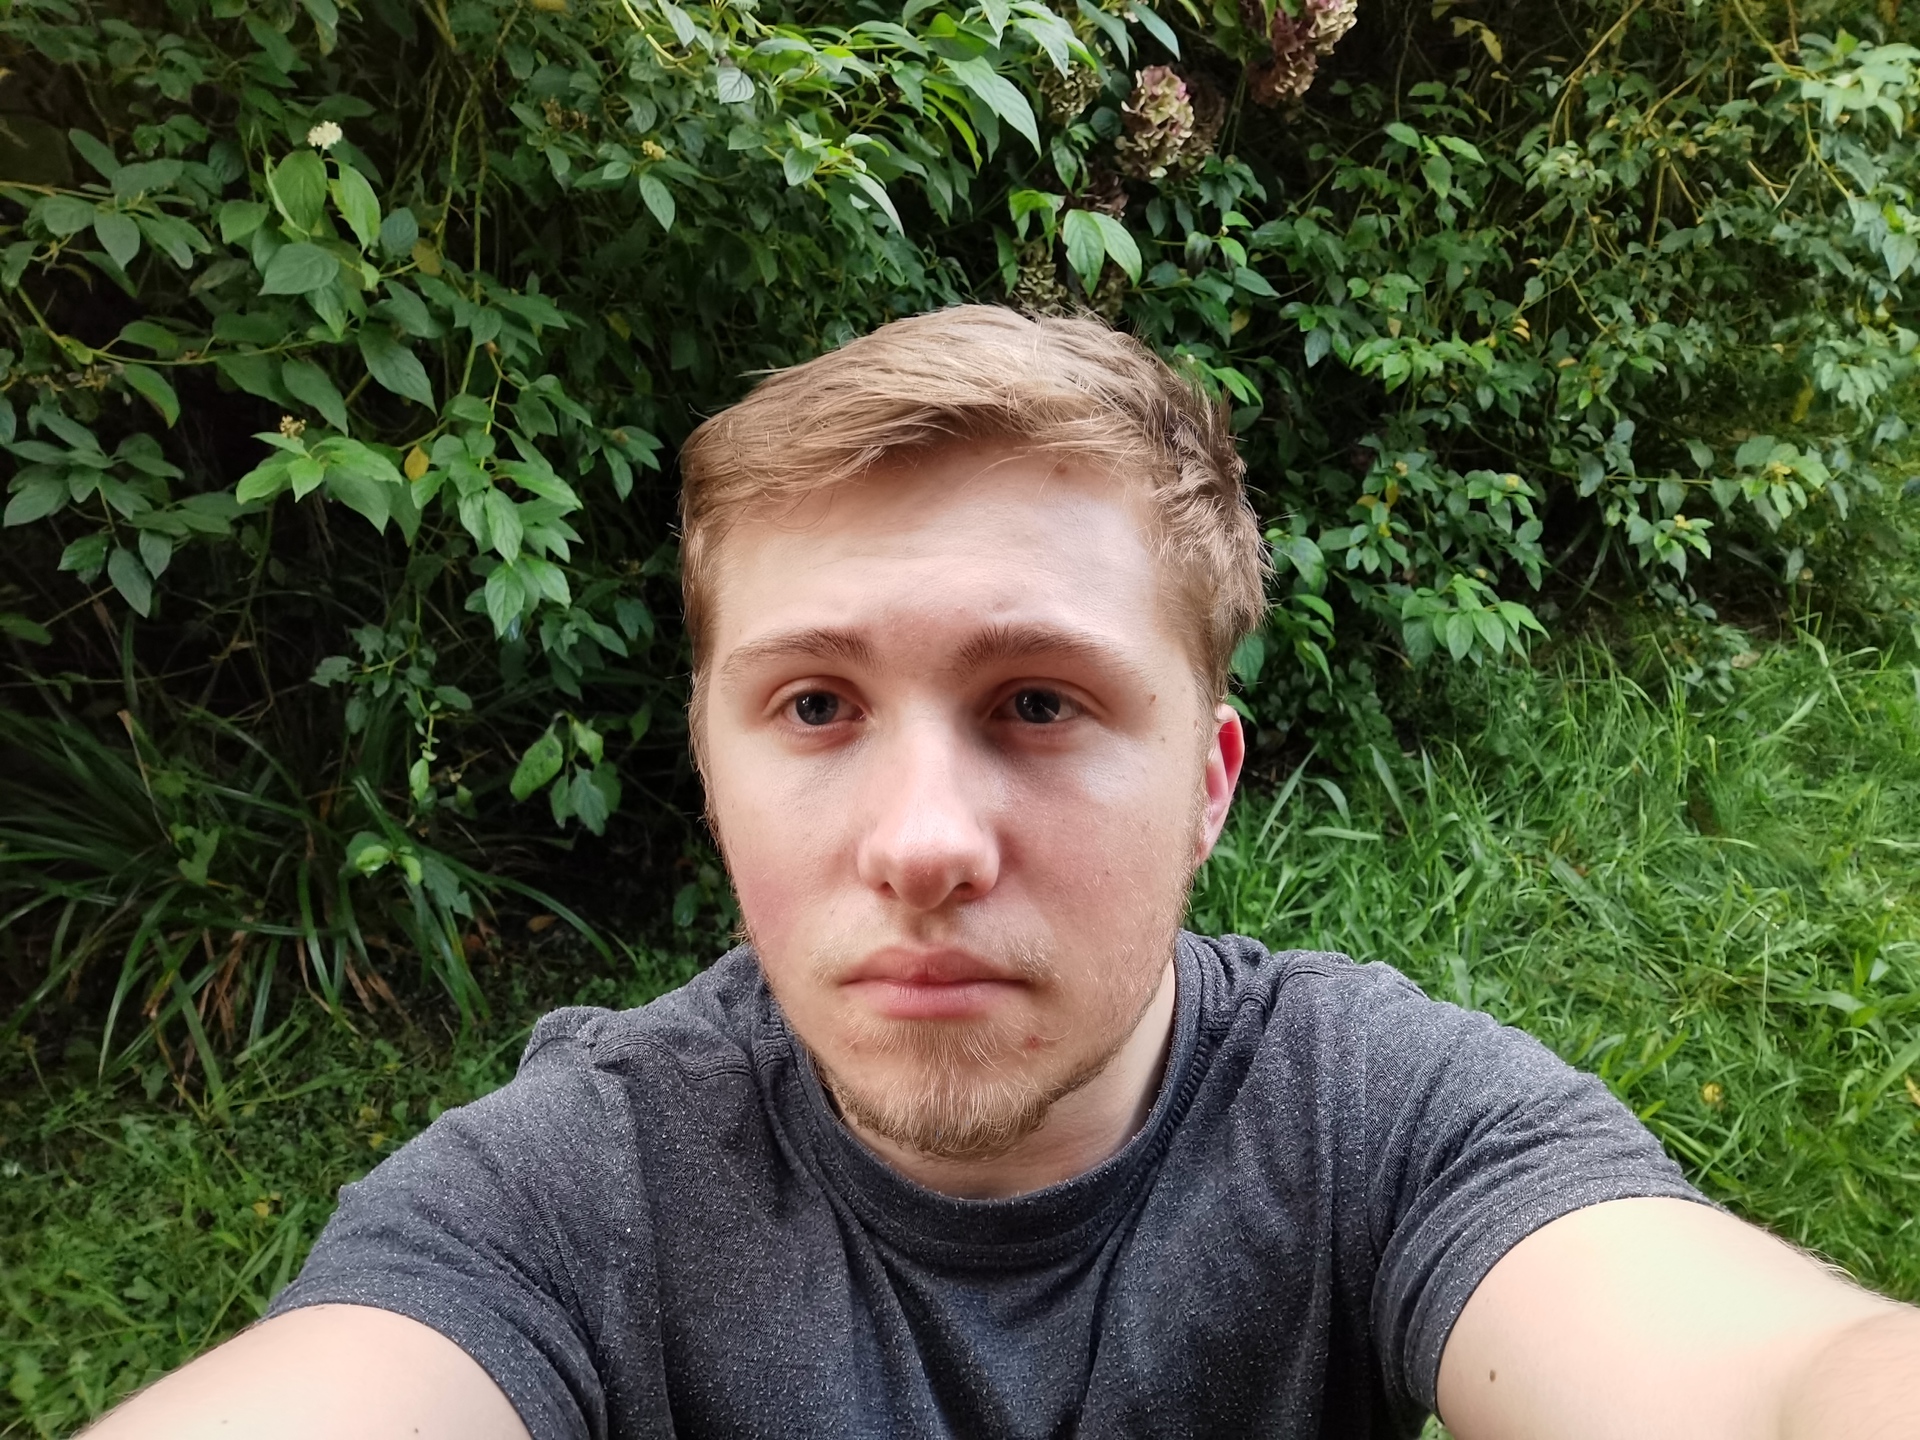 Huawei Mate 30 Pro Camera test Selfie in garden above wall with rear lighting